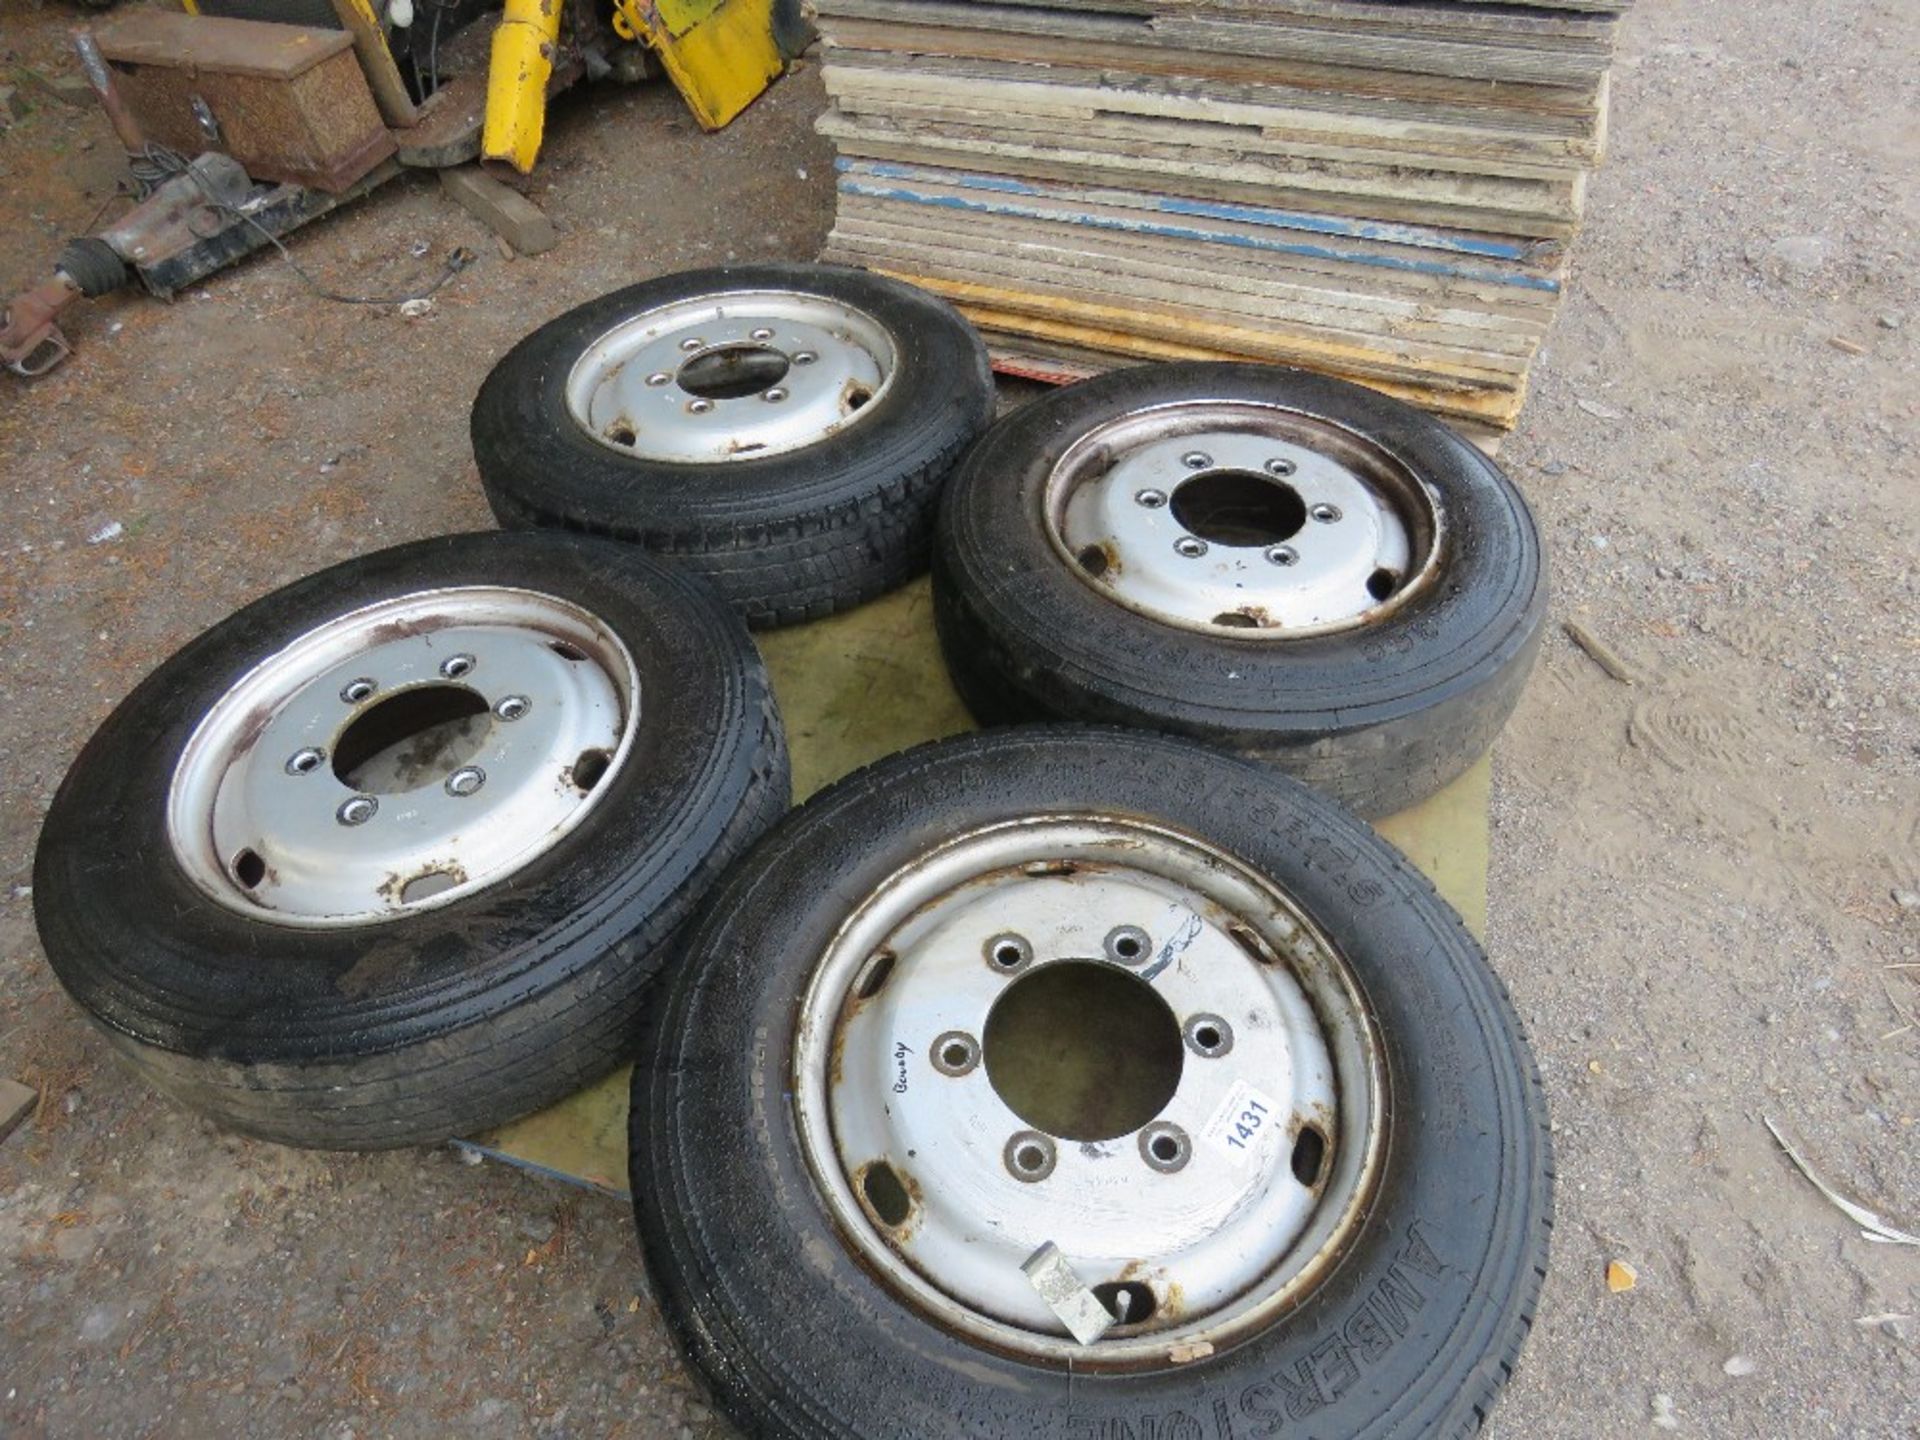 4 X 6 STUD WHEELS AND TYRES, 205/75R17.5 SIZE TYRES. NO VAT ON HAMMER PRICE. - Image 2 of 3